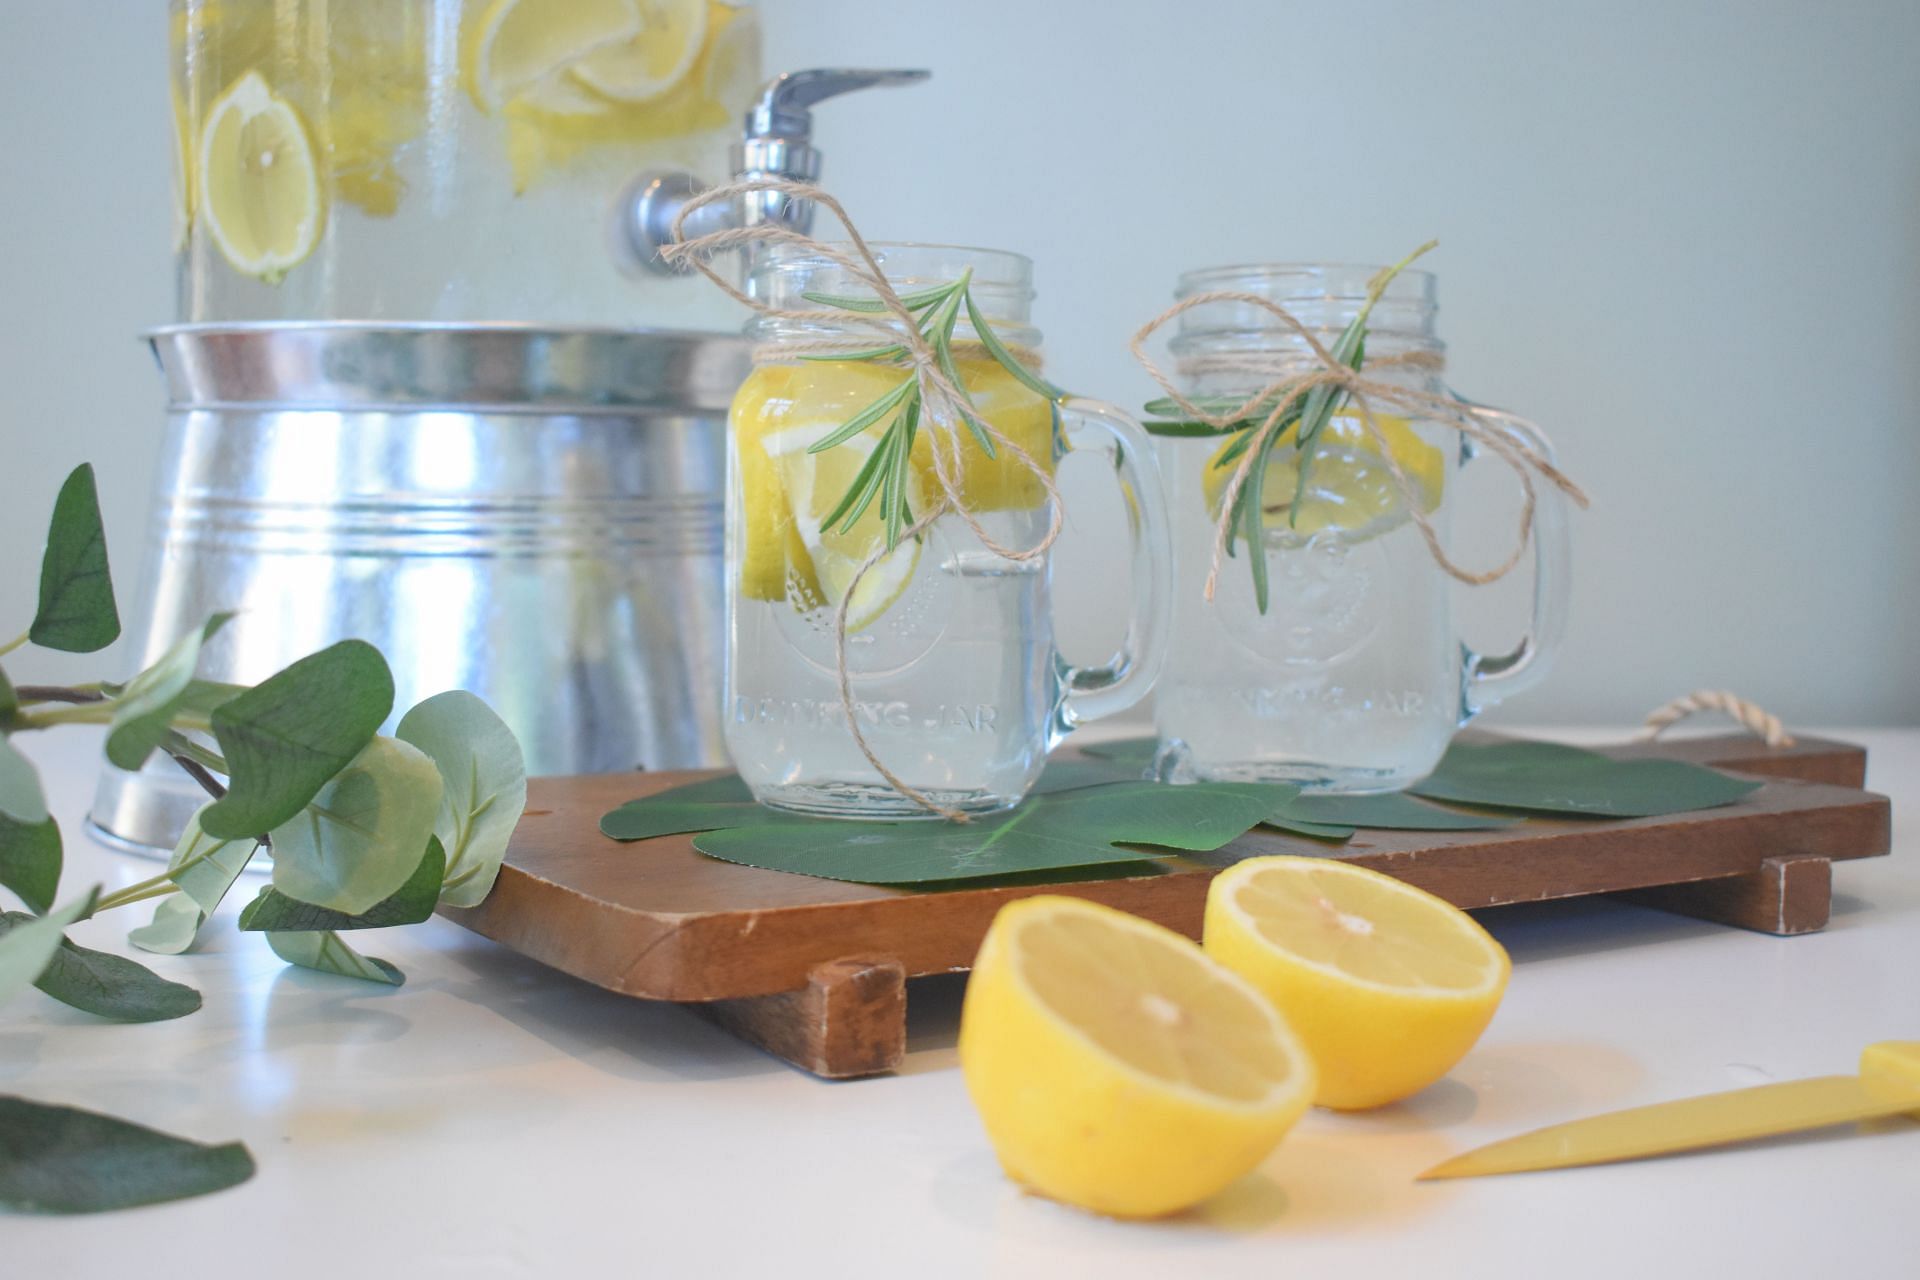 Lemon and ginger detox drink can be included in your diet. (Image via Unsplash/ Mariah Hewines)